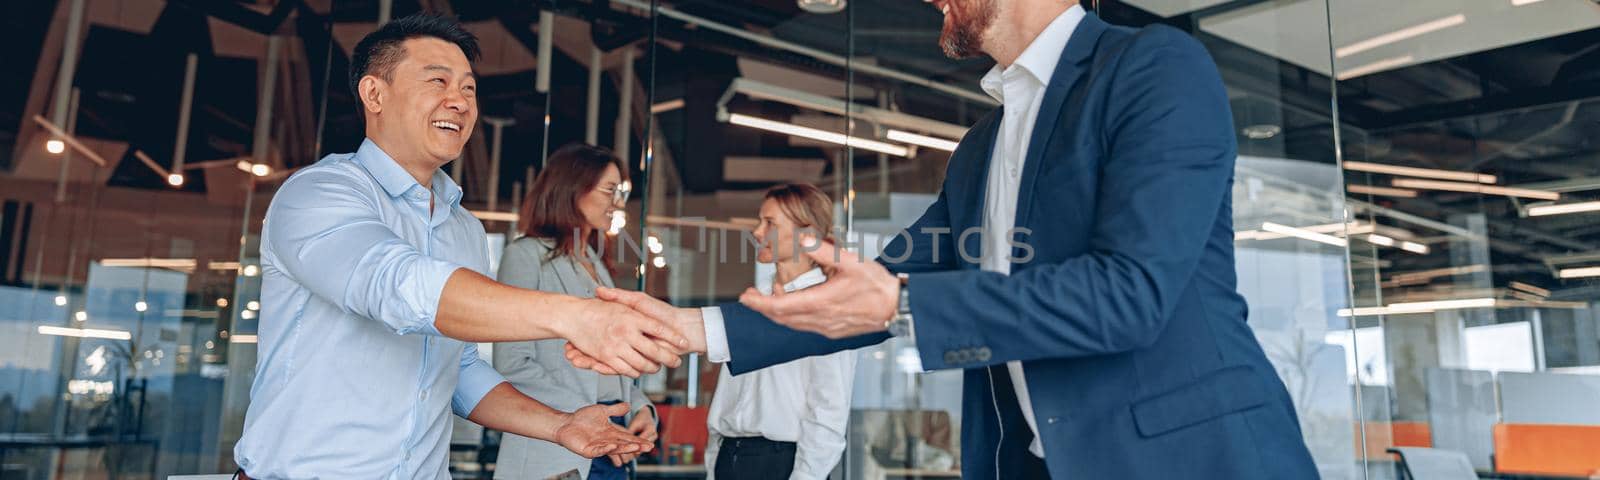 colleagues are shaking their hands in modern office during teamwork meeting by Yaroslav_astakhov